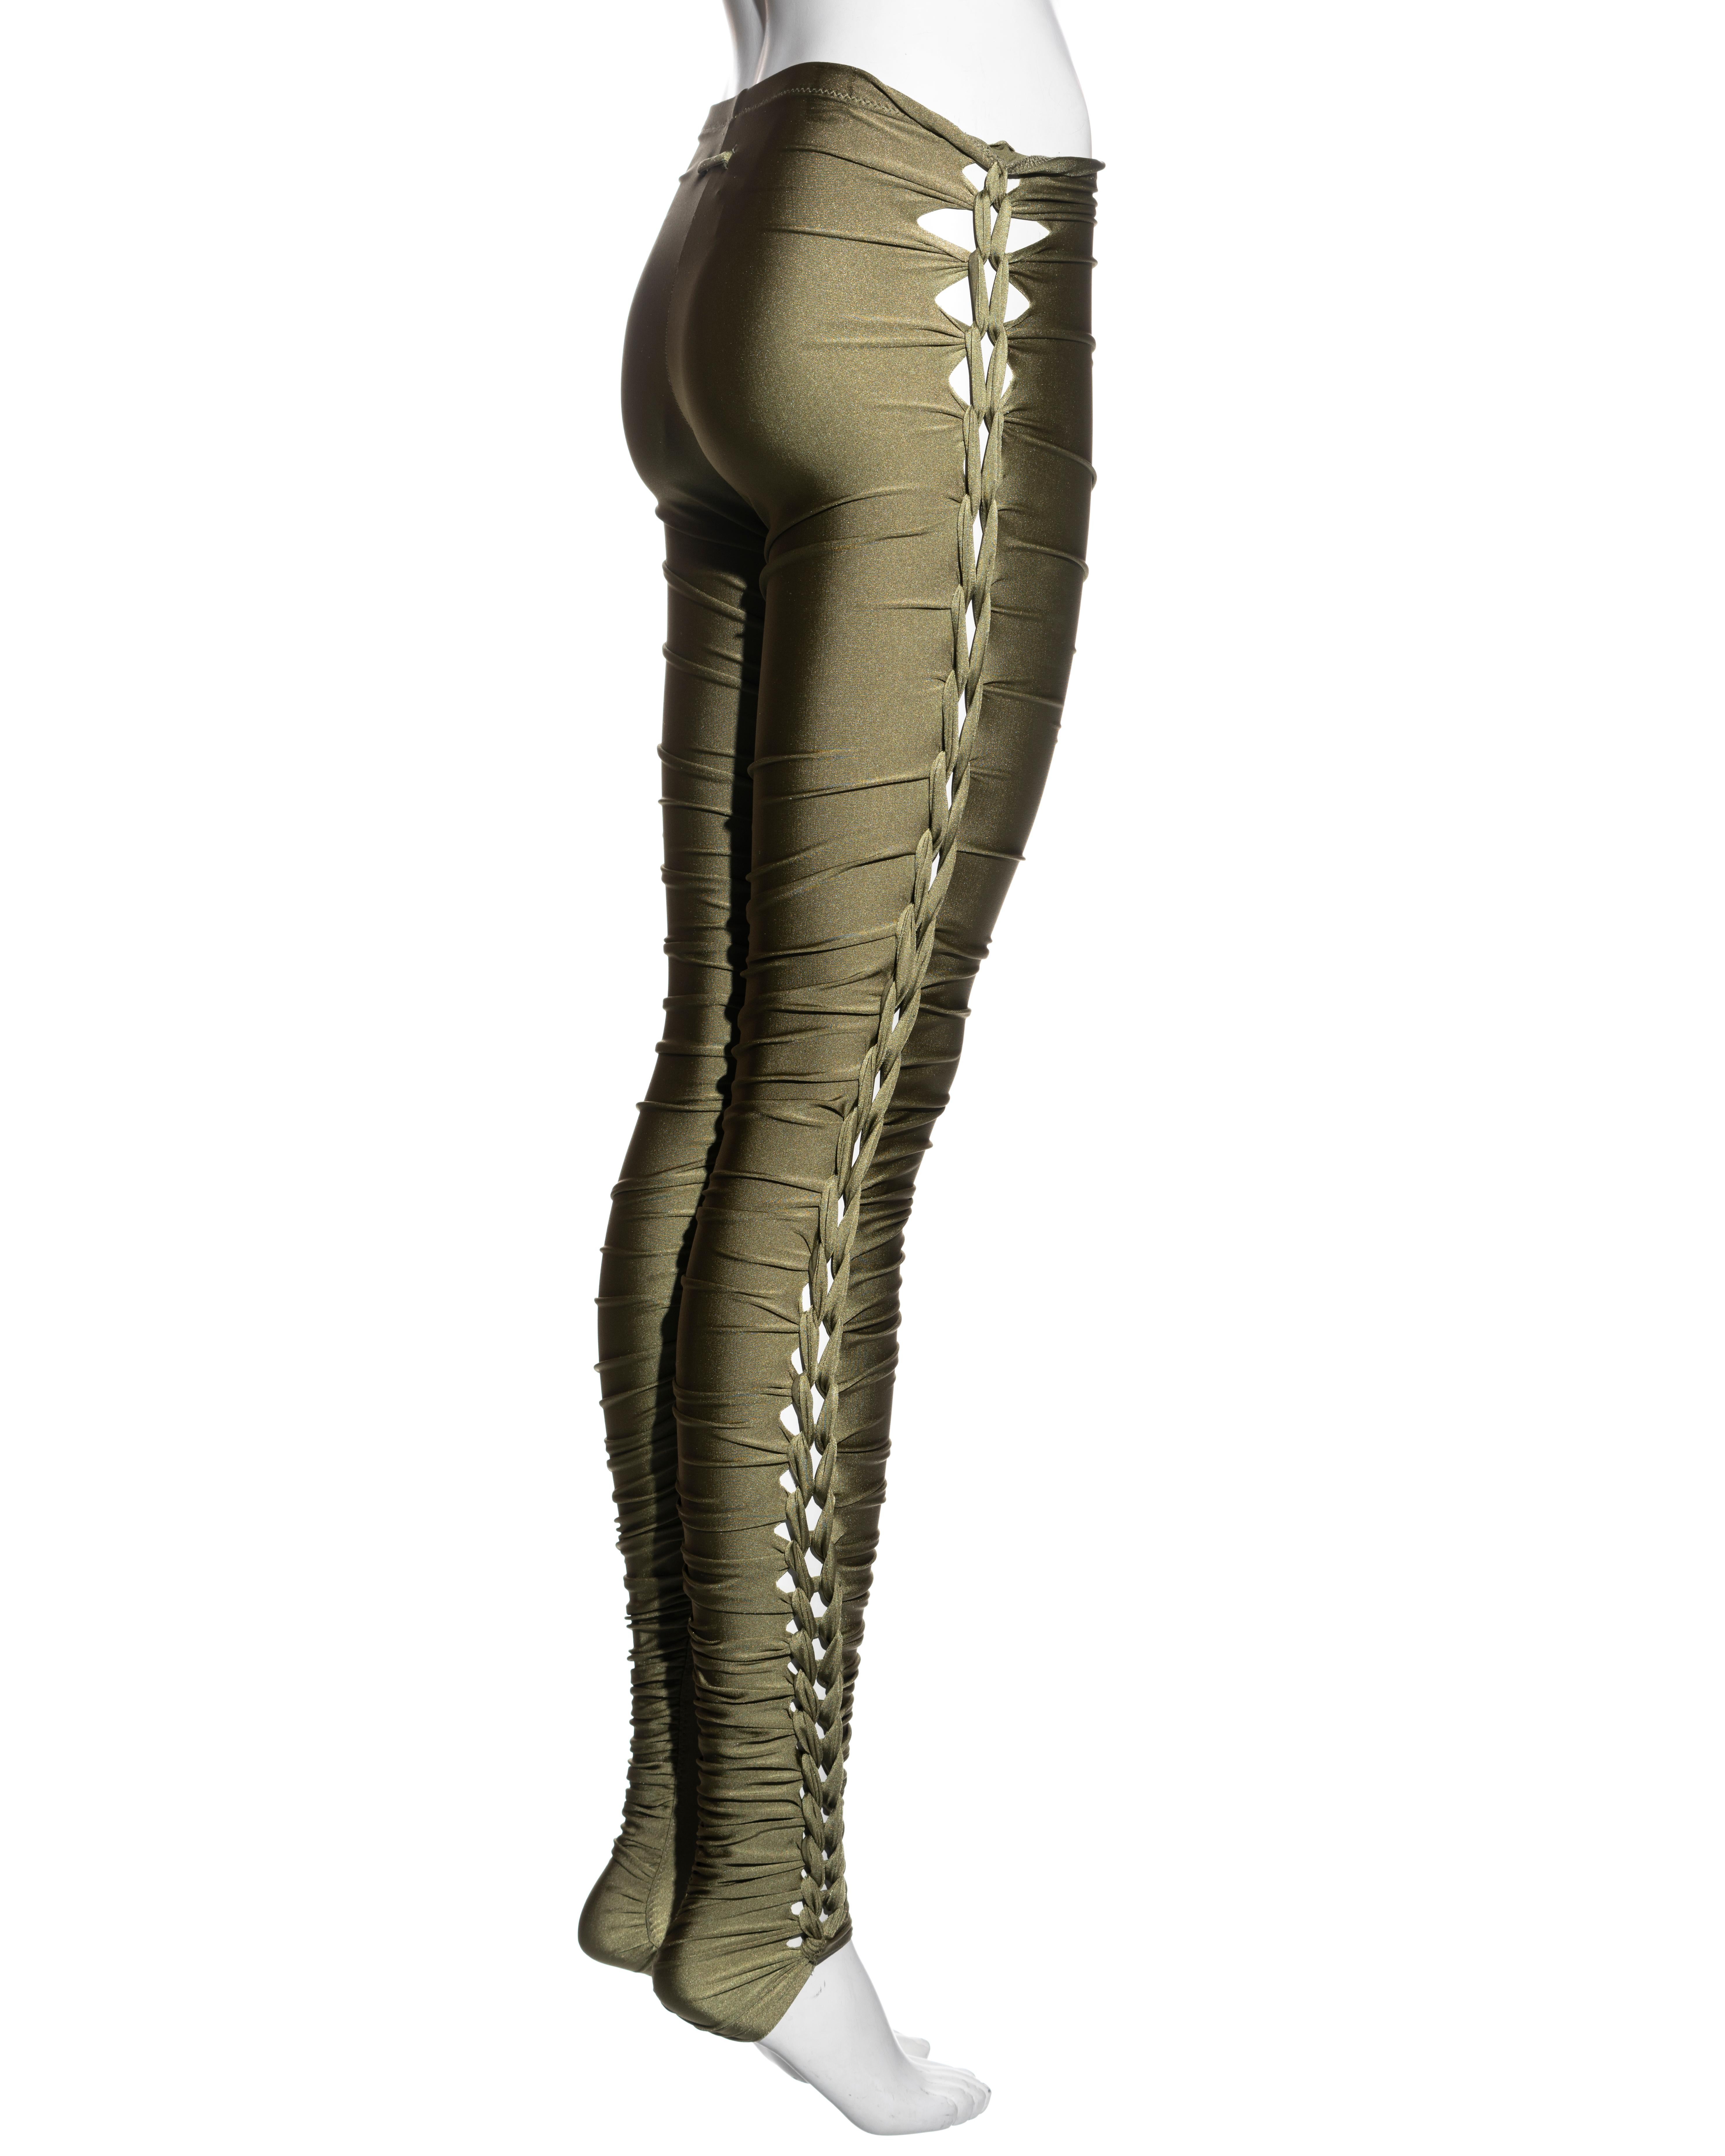 Jean Paul Gaultier green nylon jersey ruched leggings, ss 2011 For Sale 2